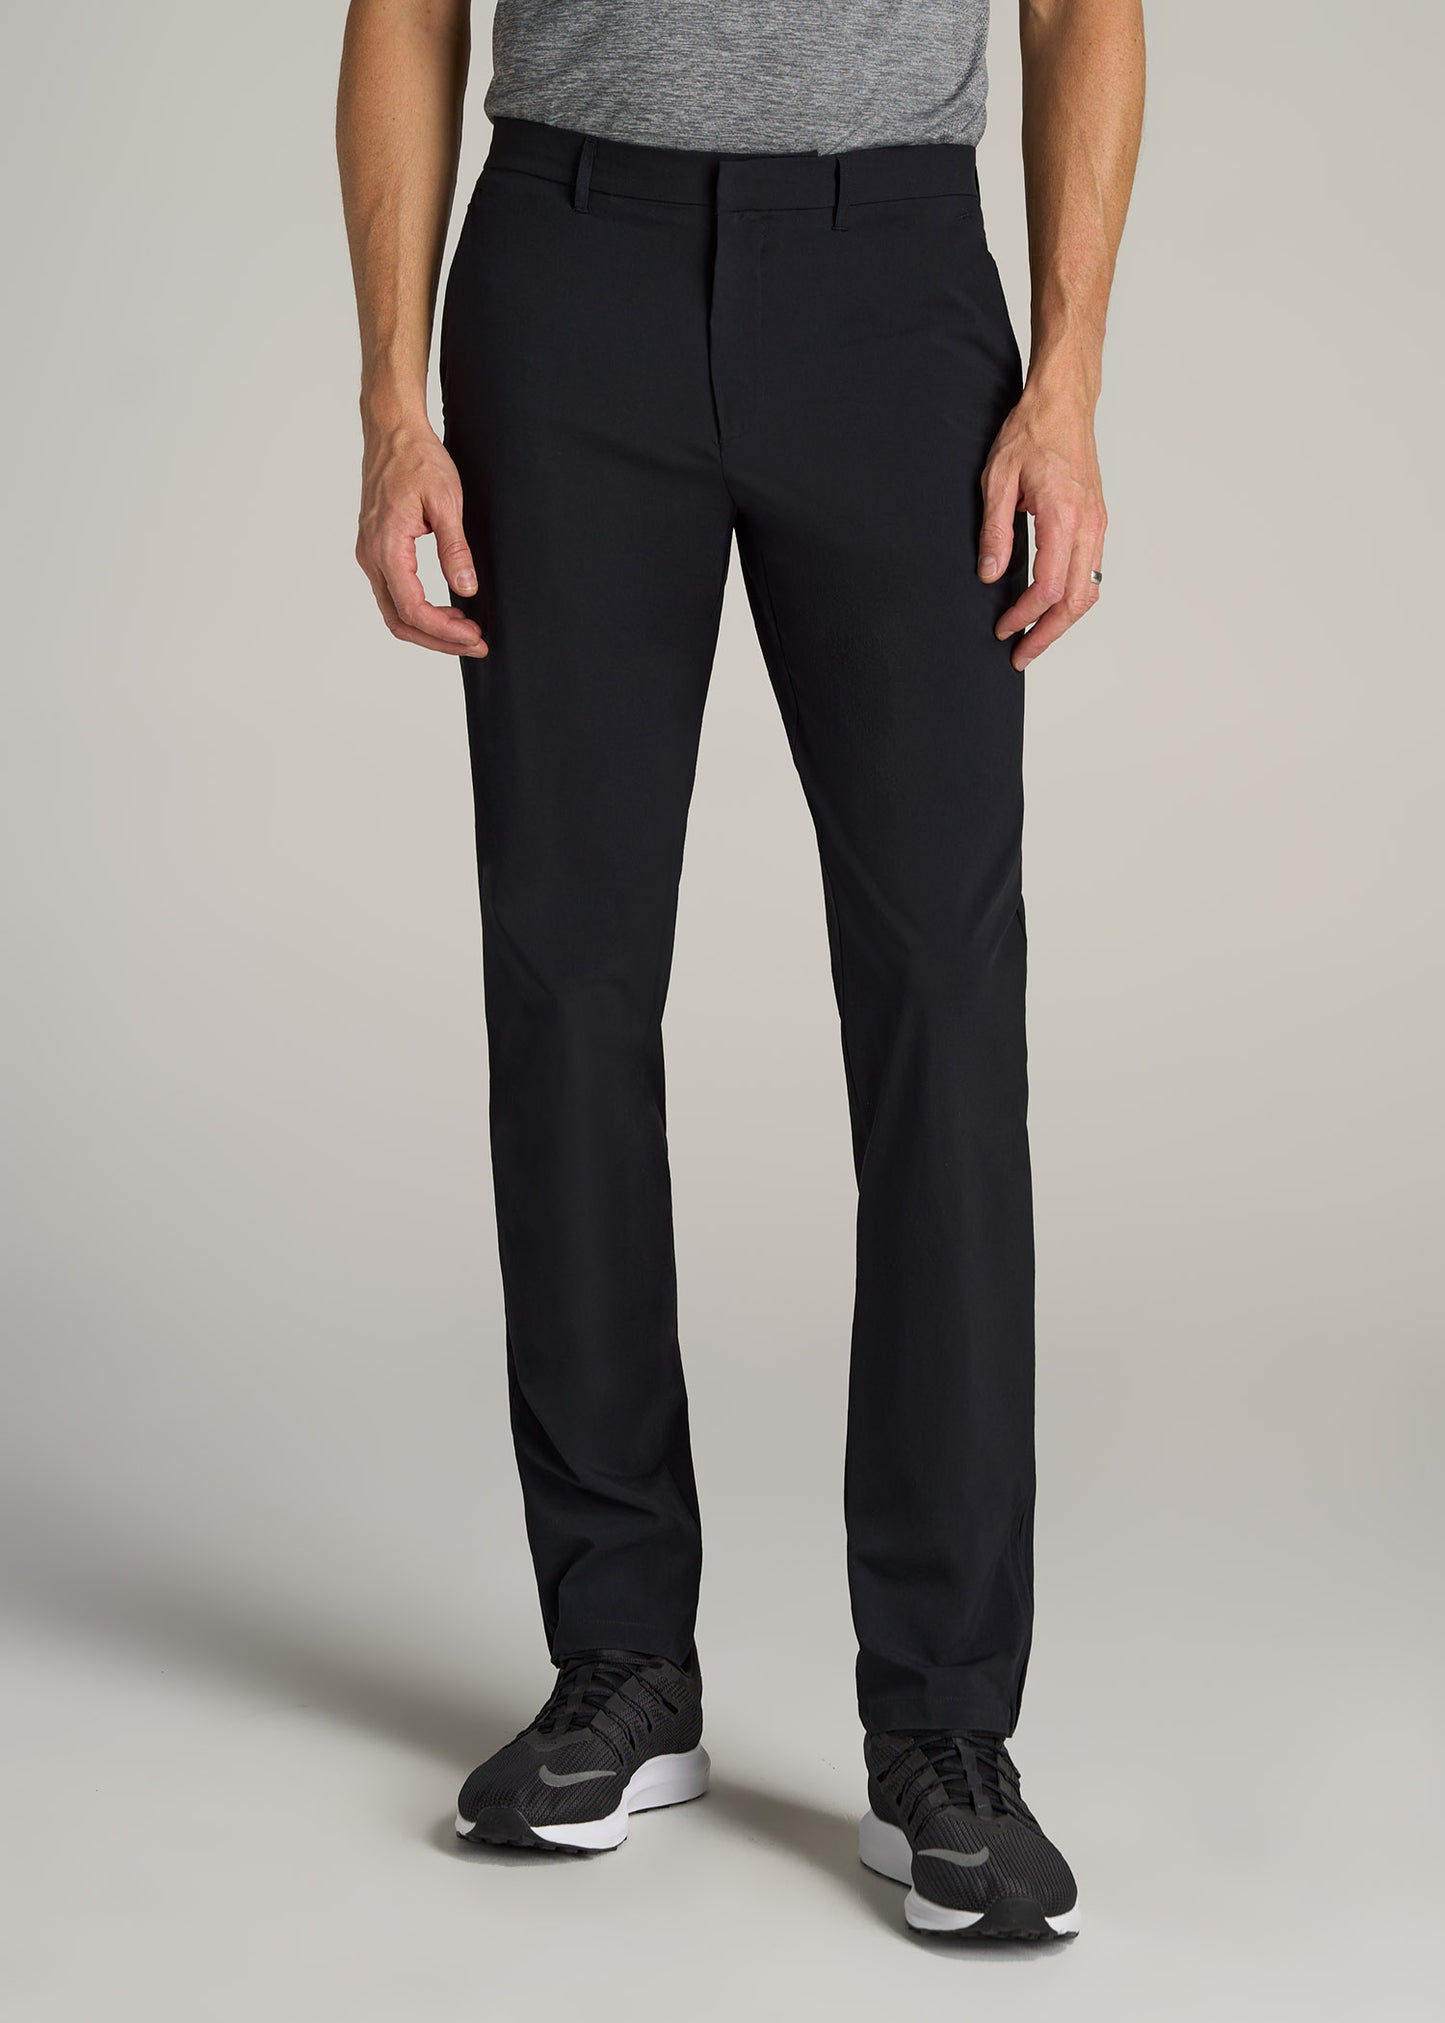 A tall man wearing American Tall's Performance Performance Tapered-Fit Chino Pants in Black.